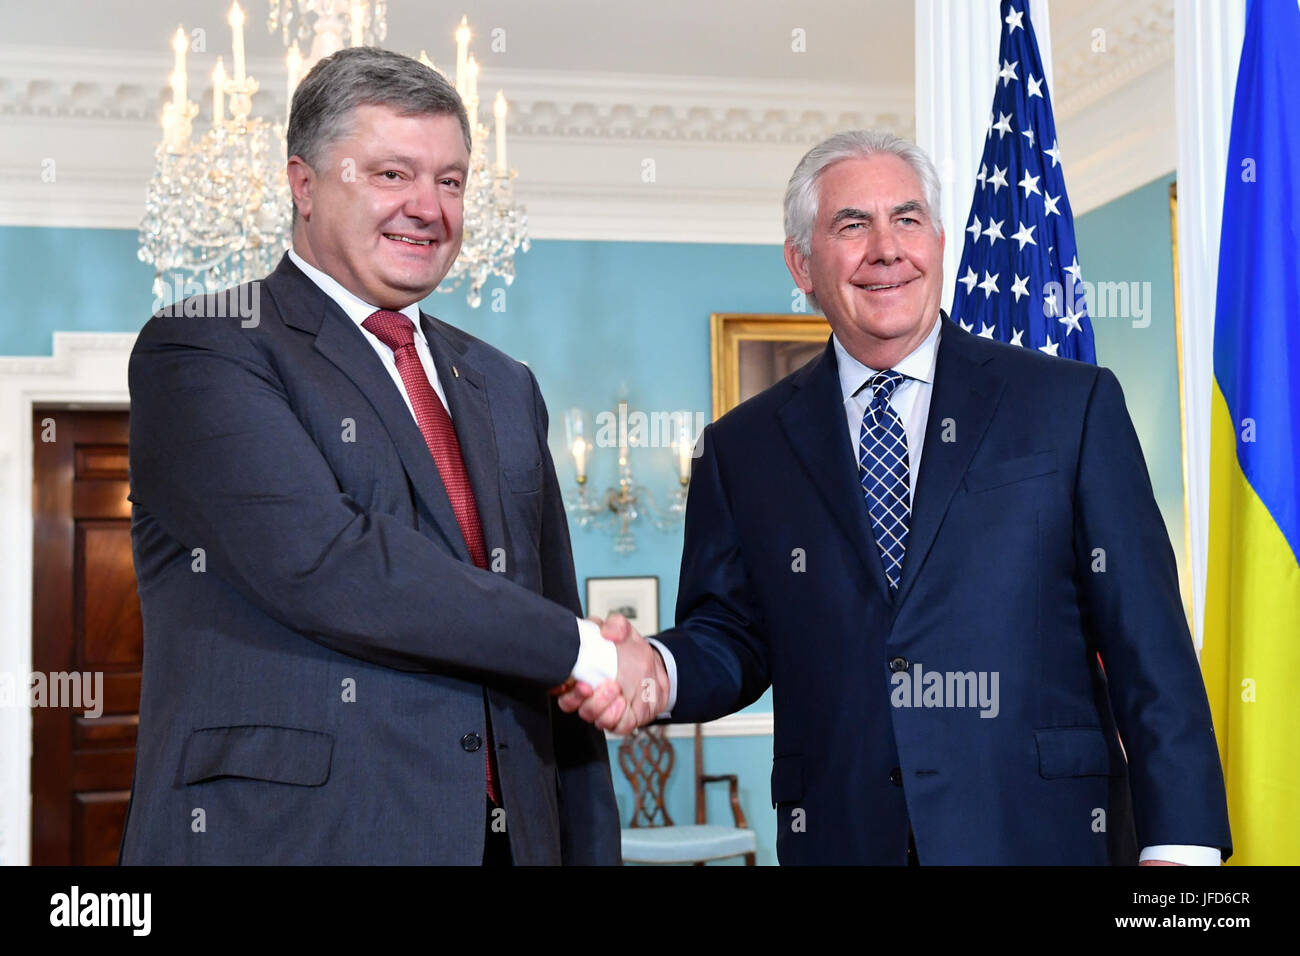 U.S. Secretary of State Rex Tillerson and Ukrainian President Petro Poroshenko shake hands before their bilateral meeting at the U.S. Department of State in Washington, D.C., on June 20, 2017. Stock Photo